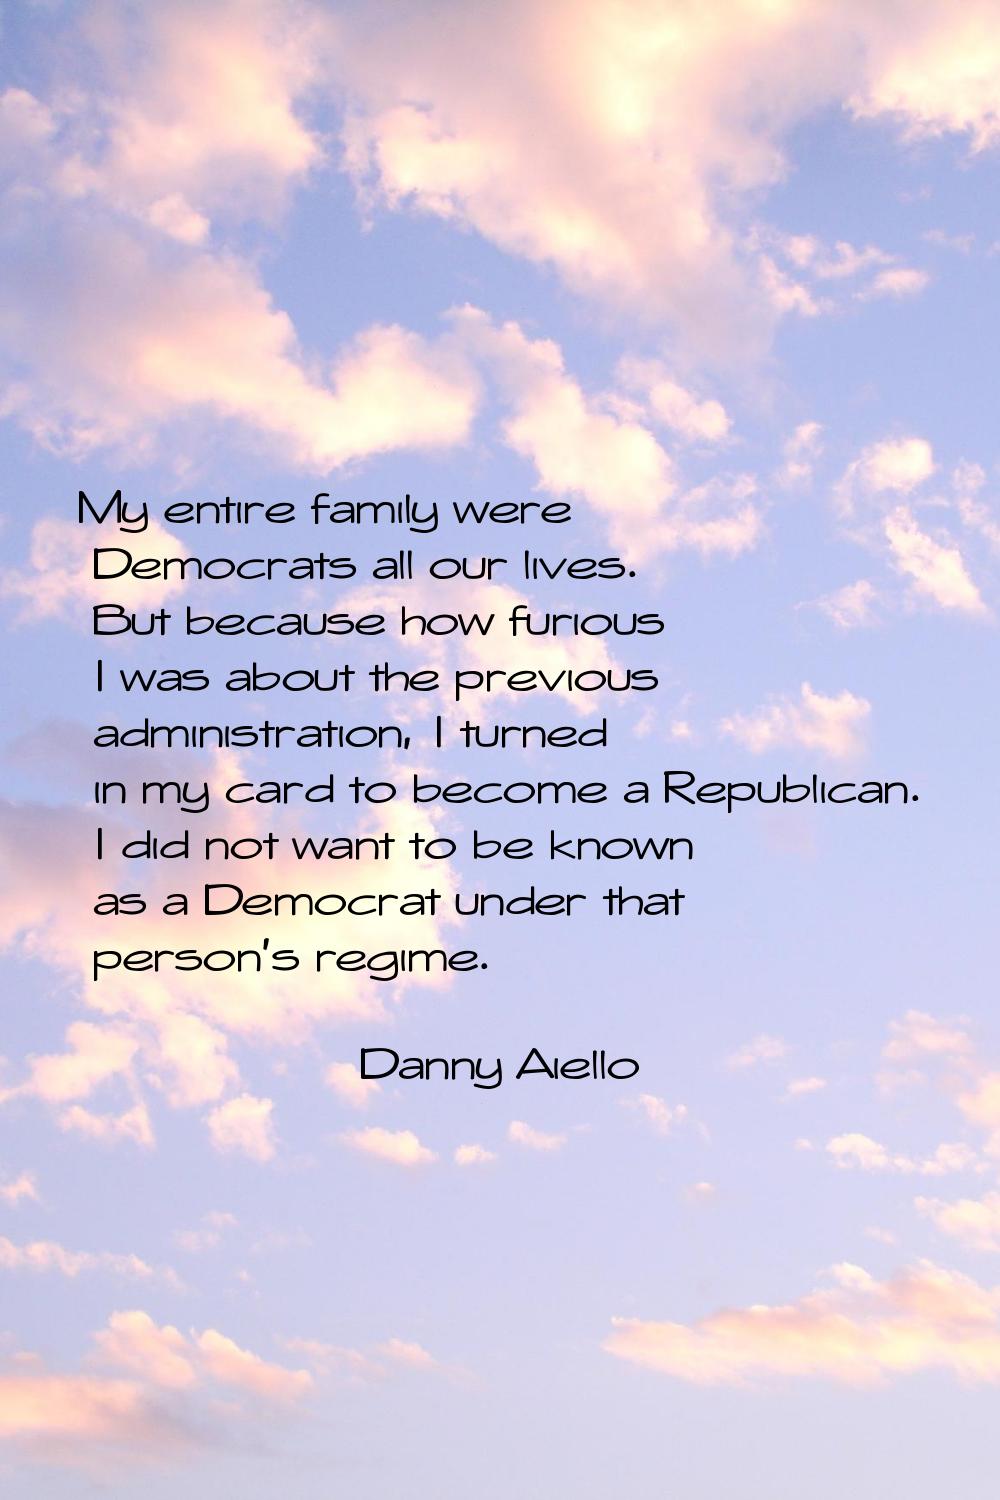 My entire family were Democrats all our lives. But because how furious I was about the previous adm